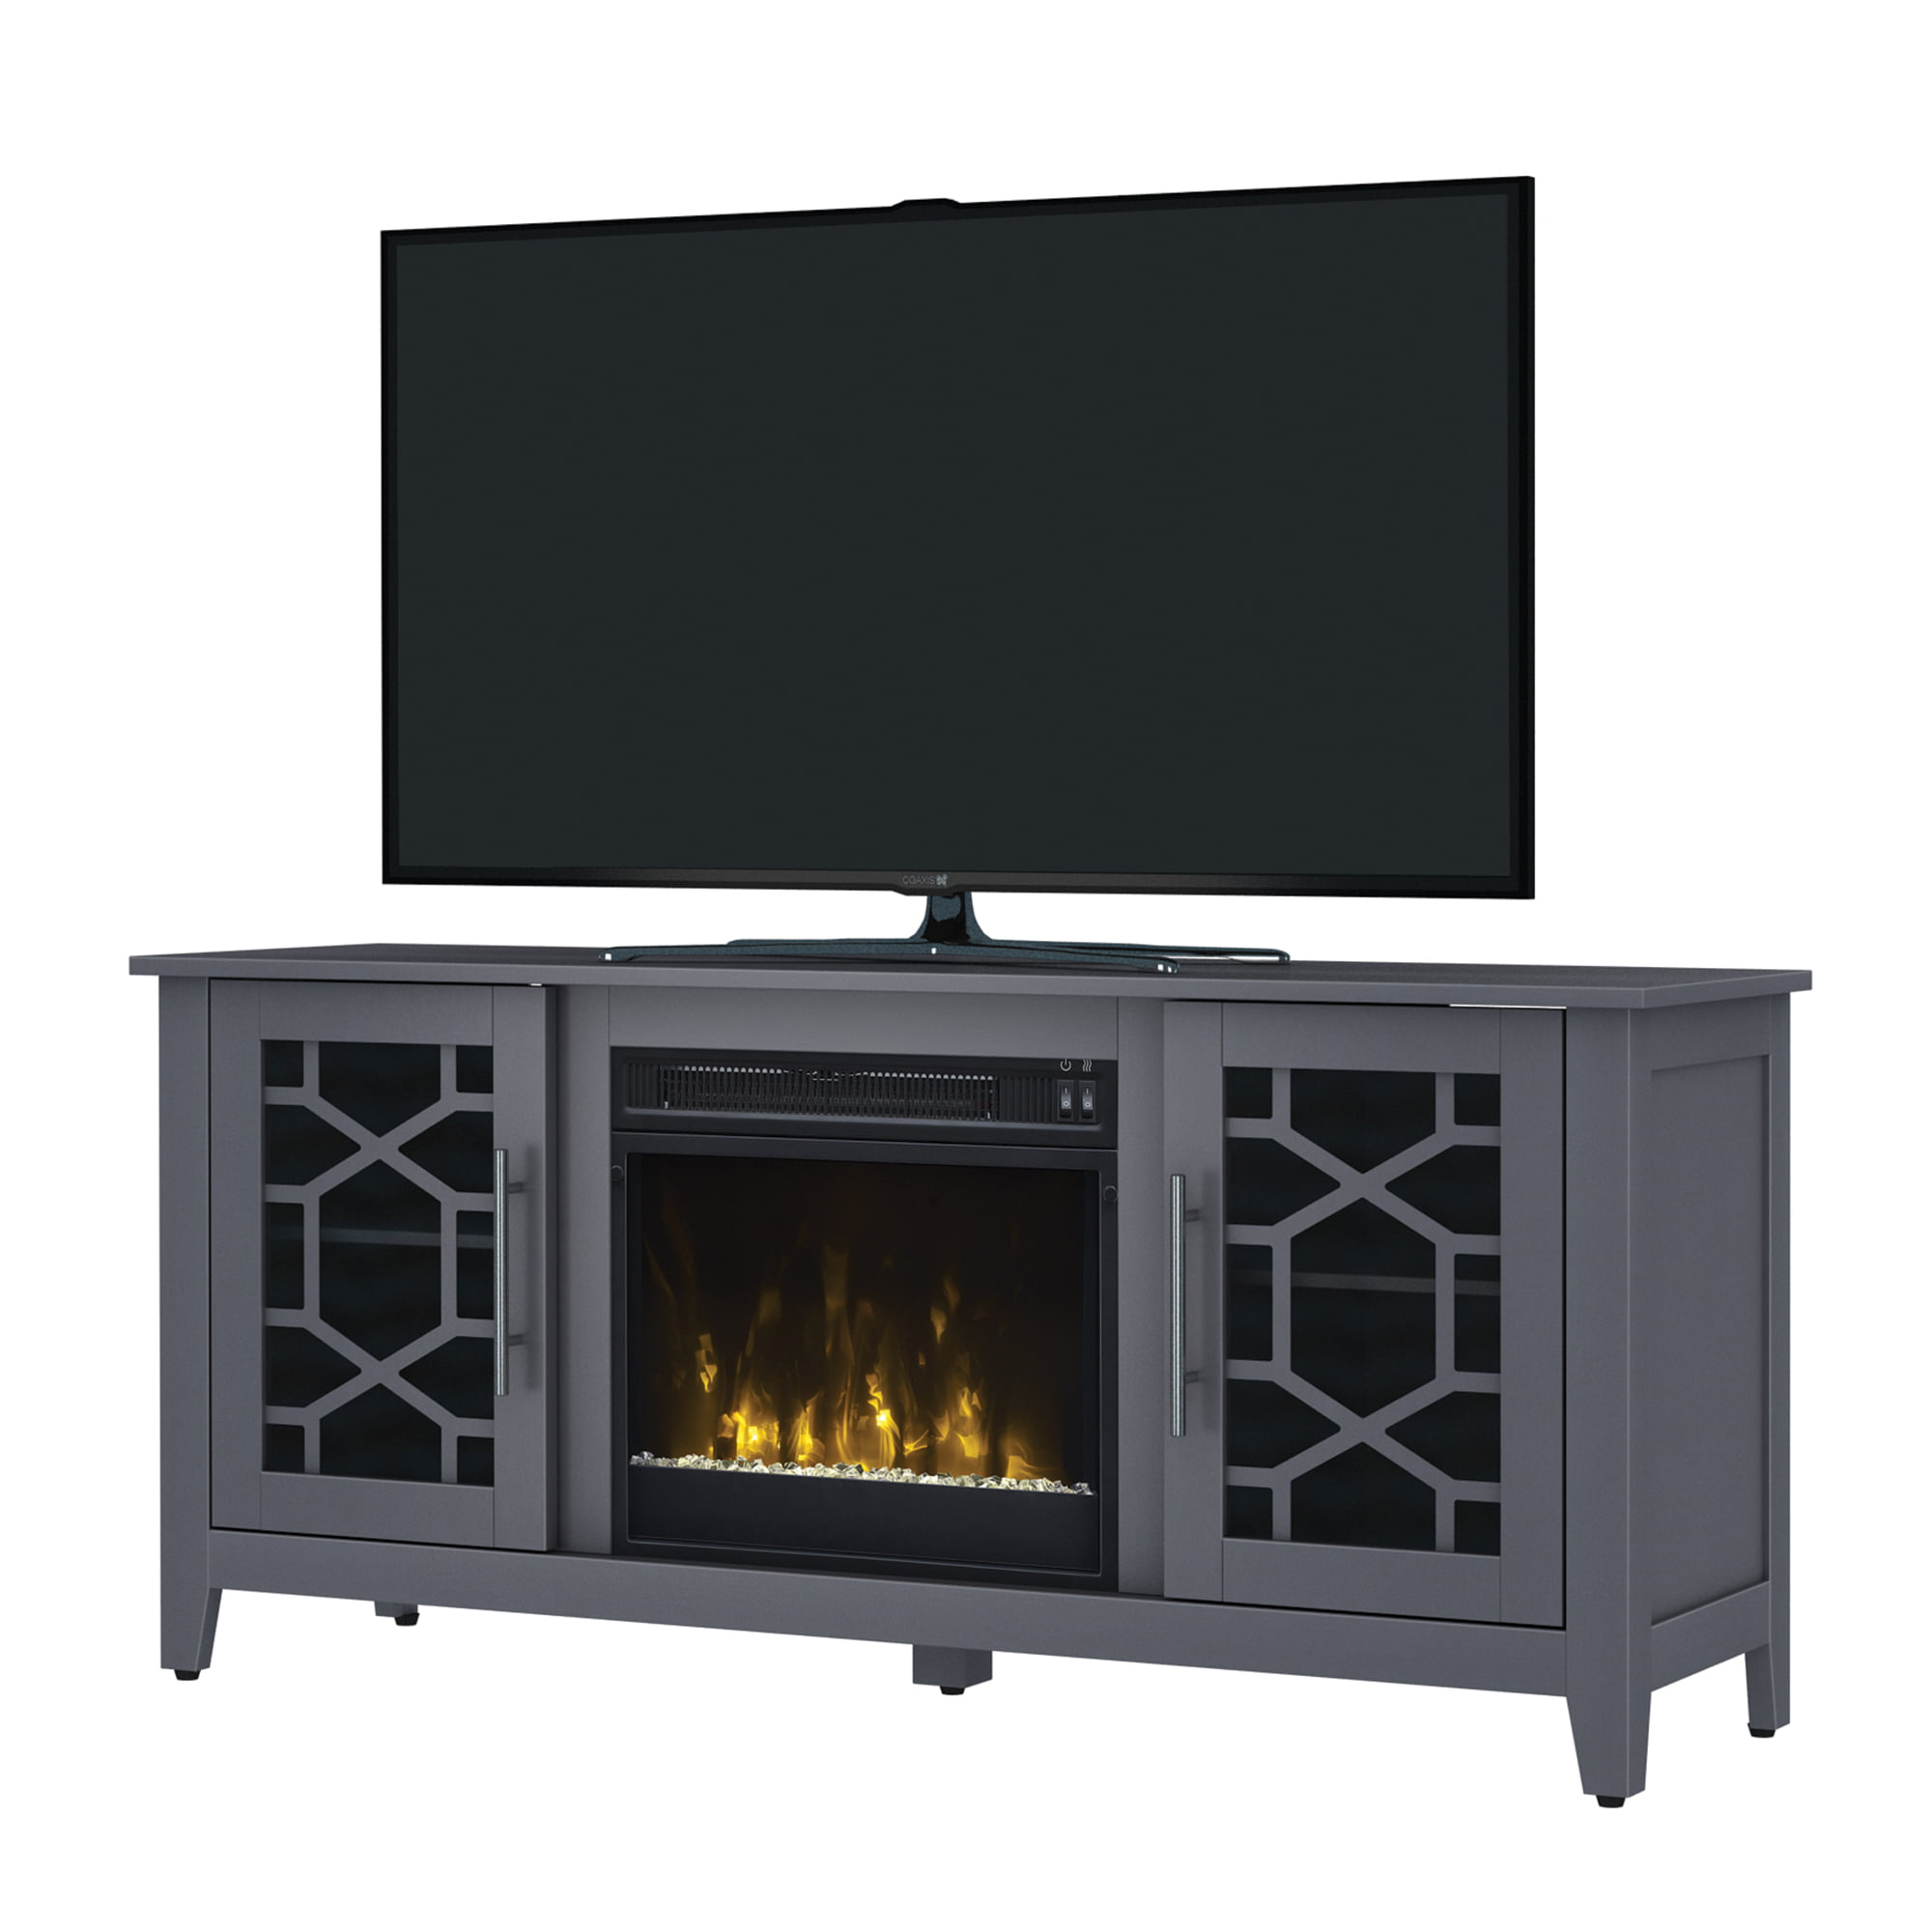 Elmhurst Cool Gray TV Stand for TVs up to 60" with ...